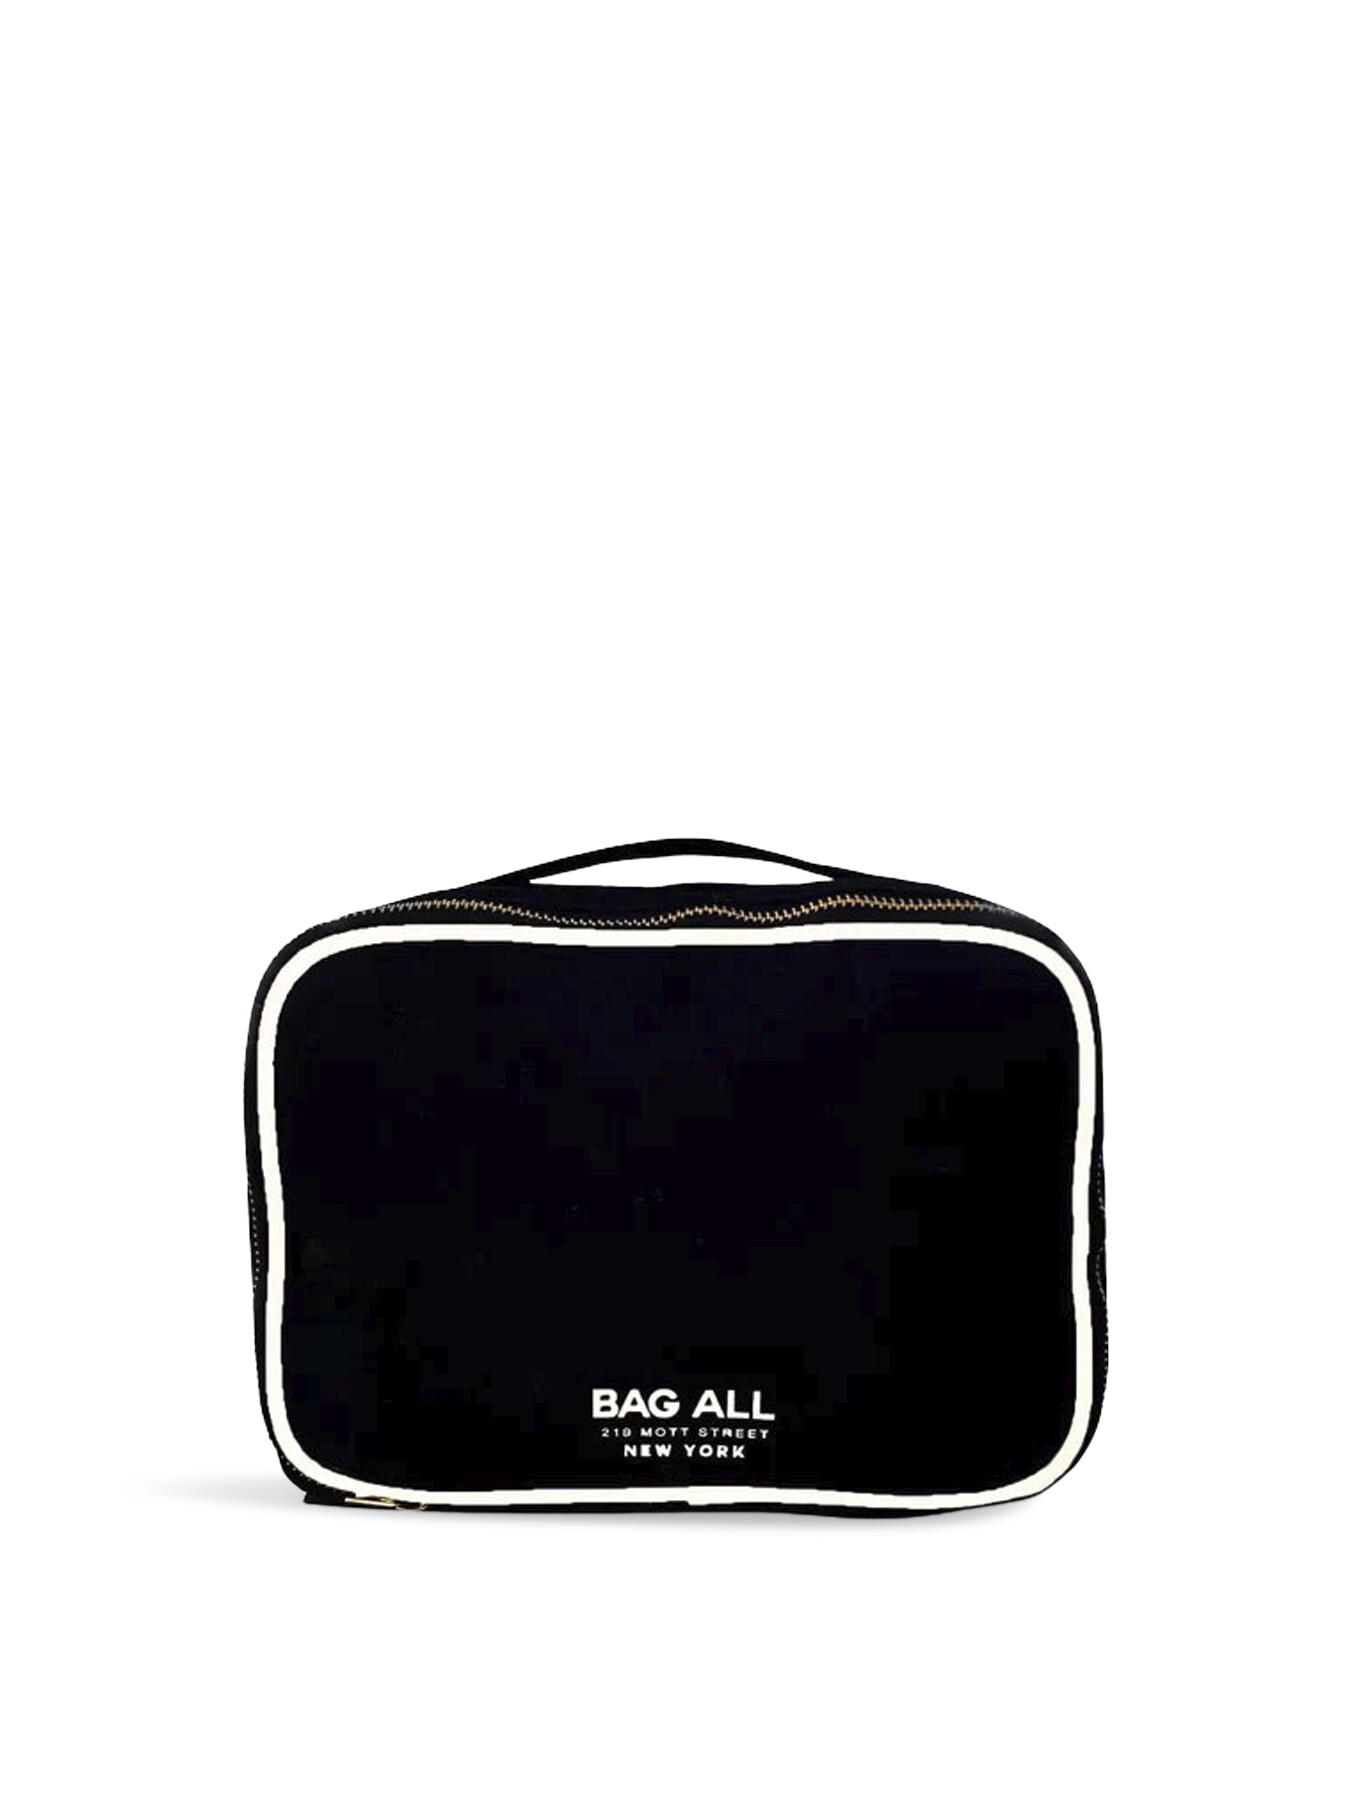 Bag-all Women's Double Sided Multi Use Case Black